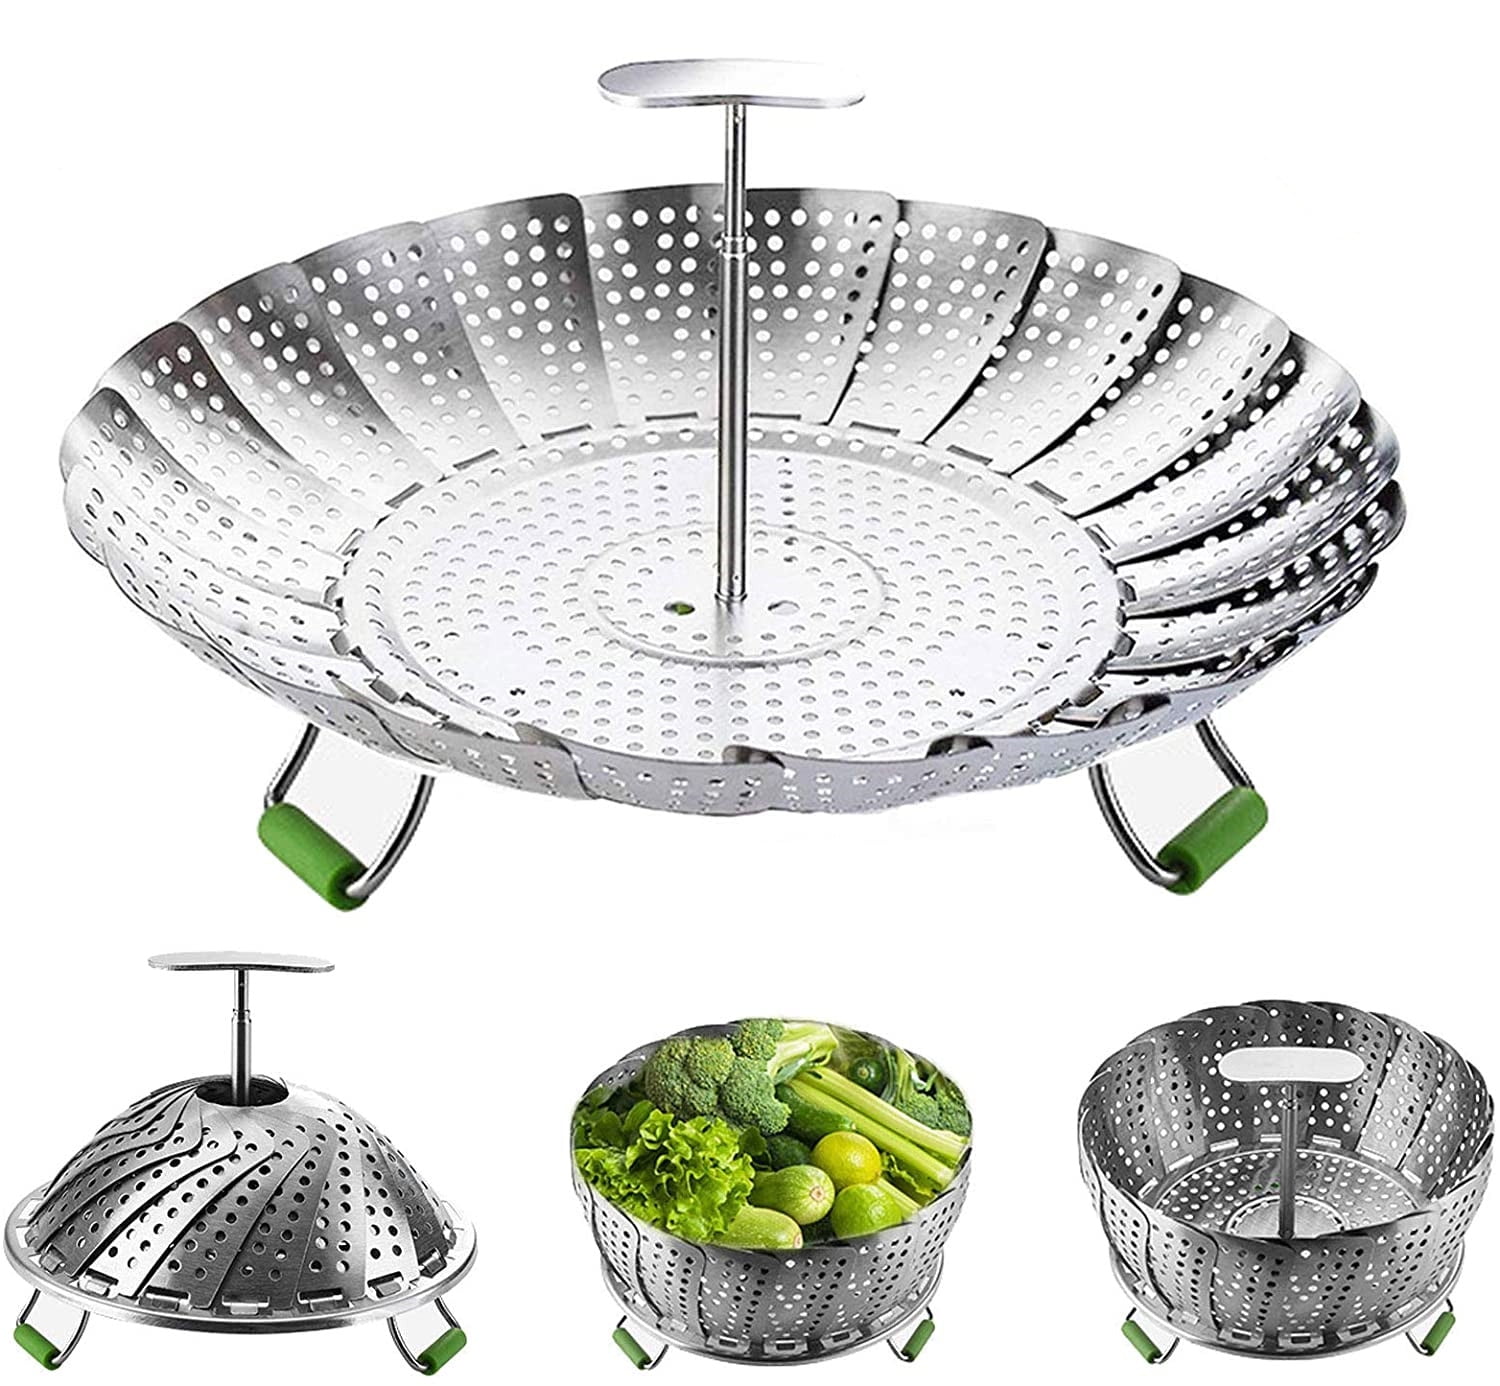 Steamer Basket, Stainless Steel Veggie Steamer Basket, Folding Expandable Steamers to Fits Various Size Pot(5.5 inch to 9 inch)